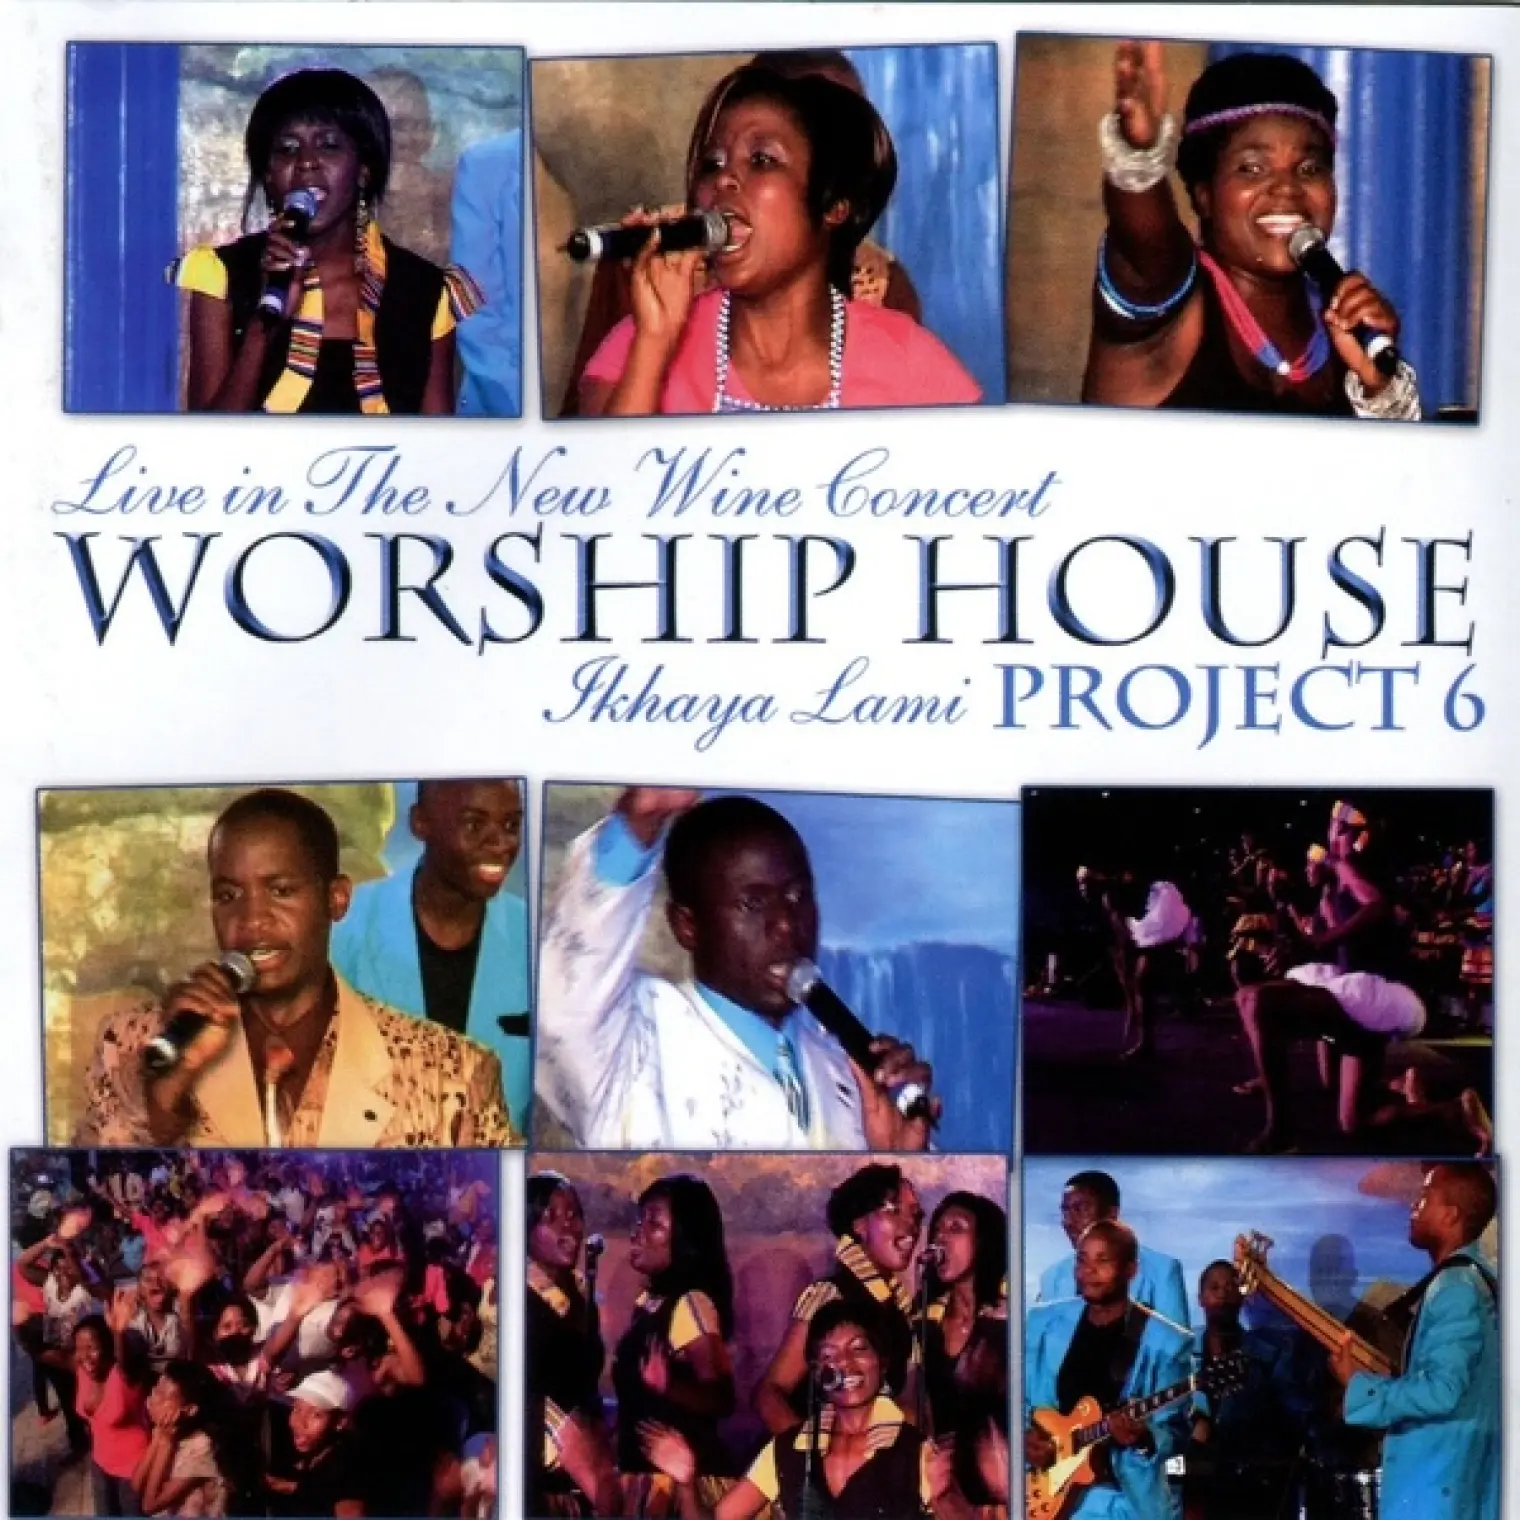 Project 6 - Ikhaya Lami, Live in the New Wine Concert -  Worship House 